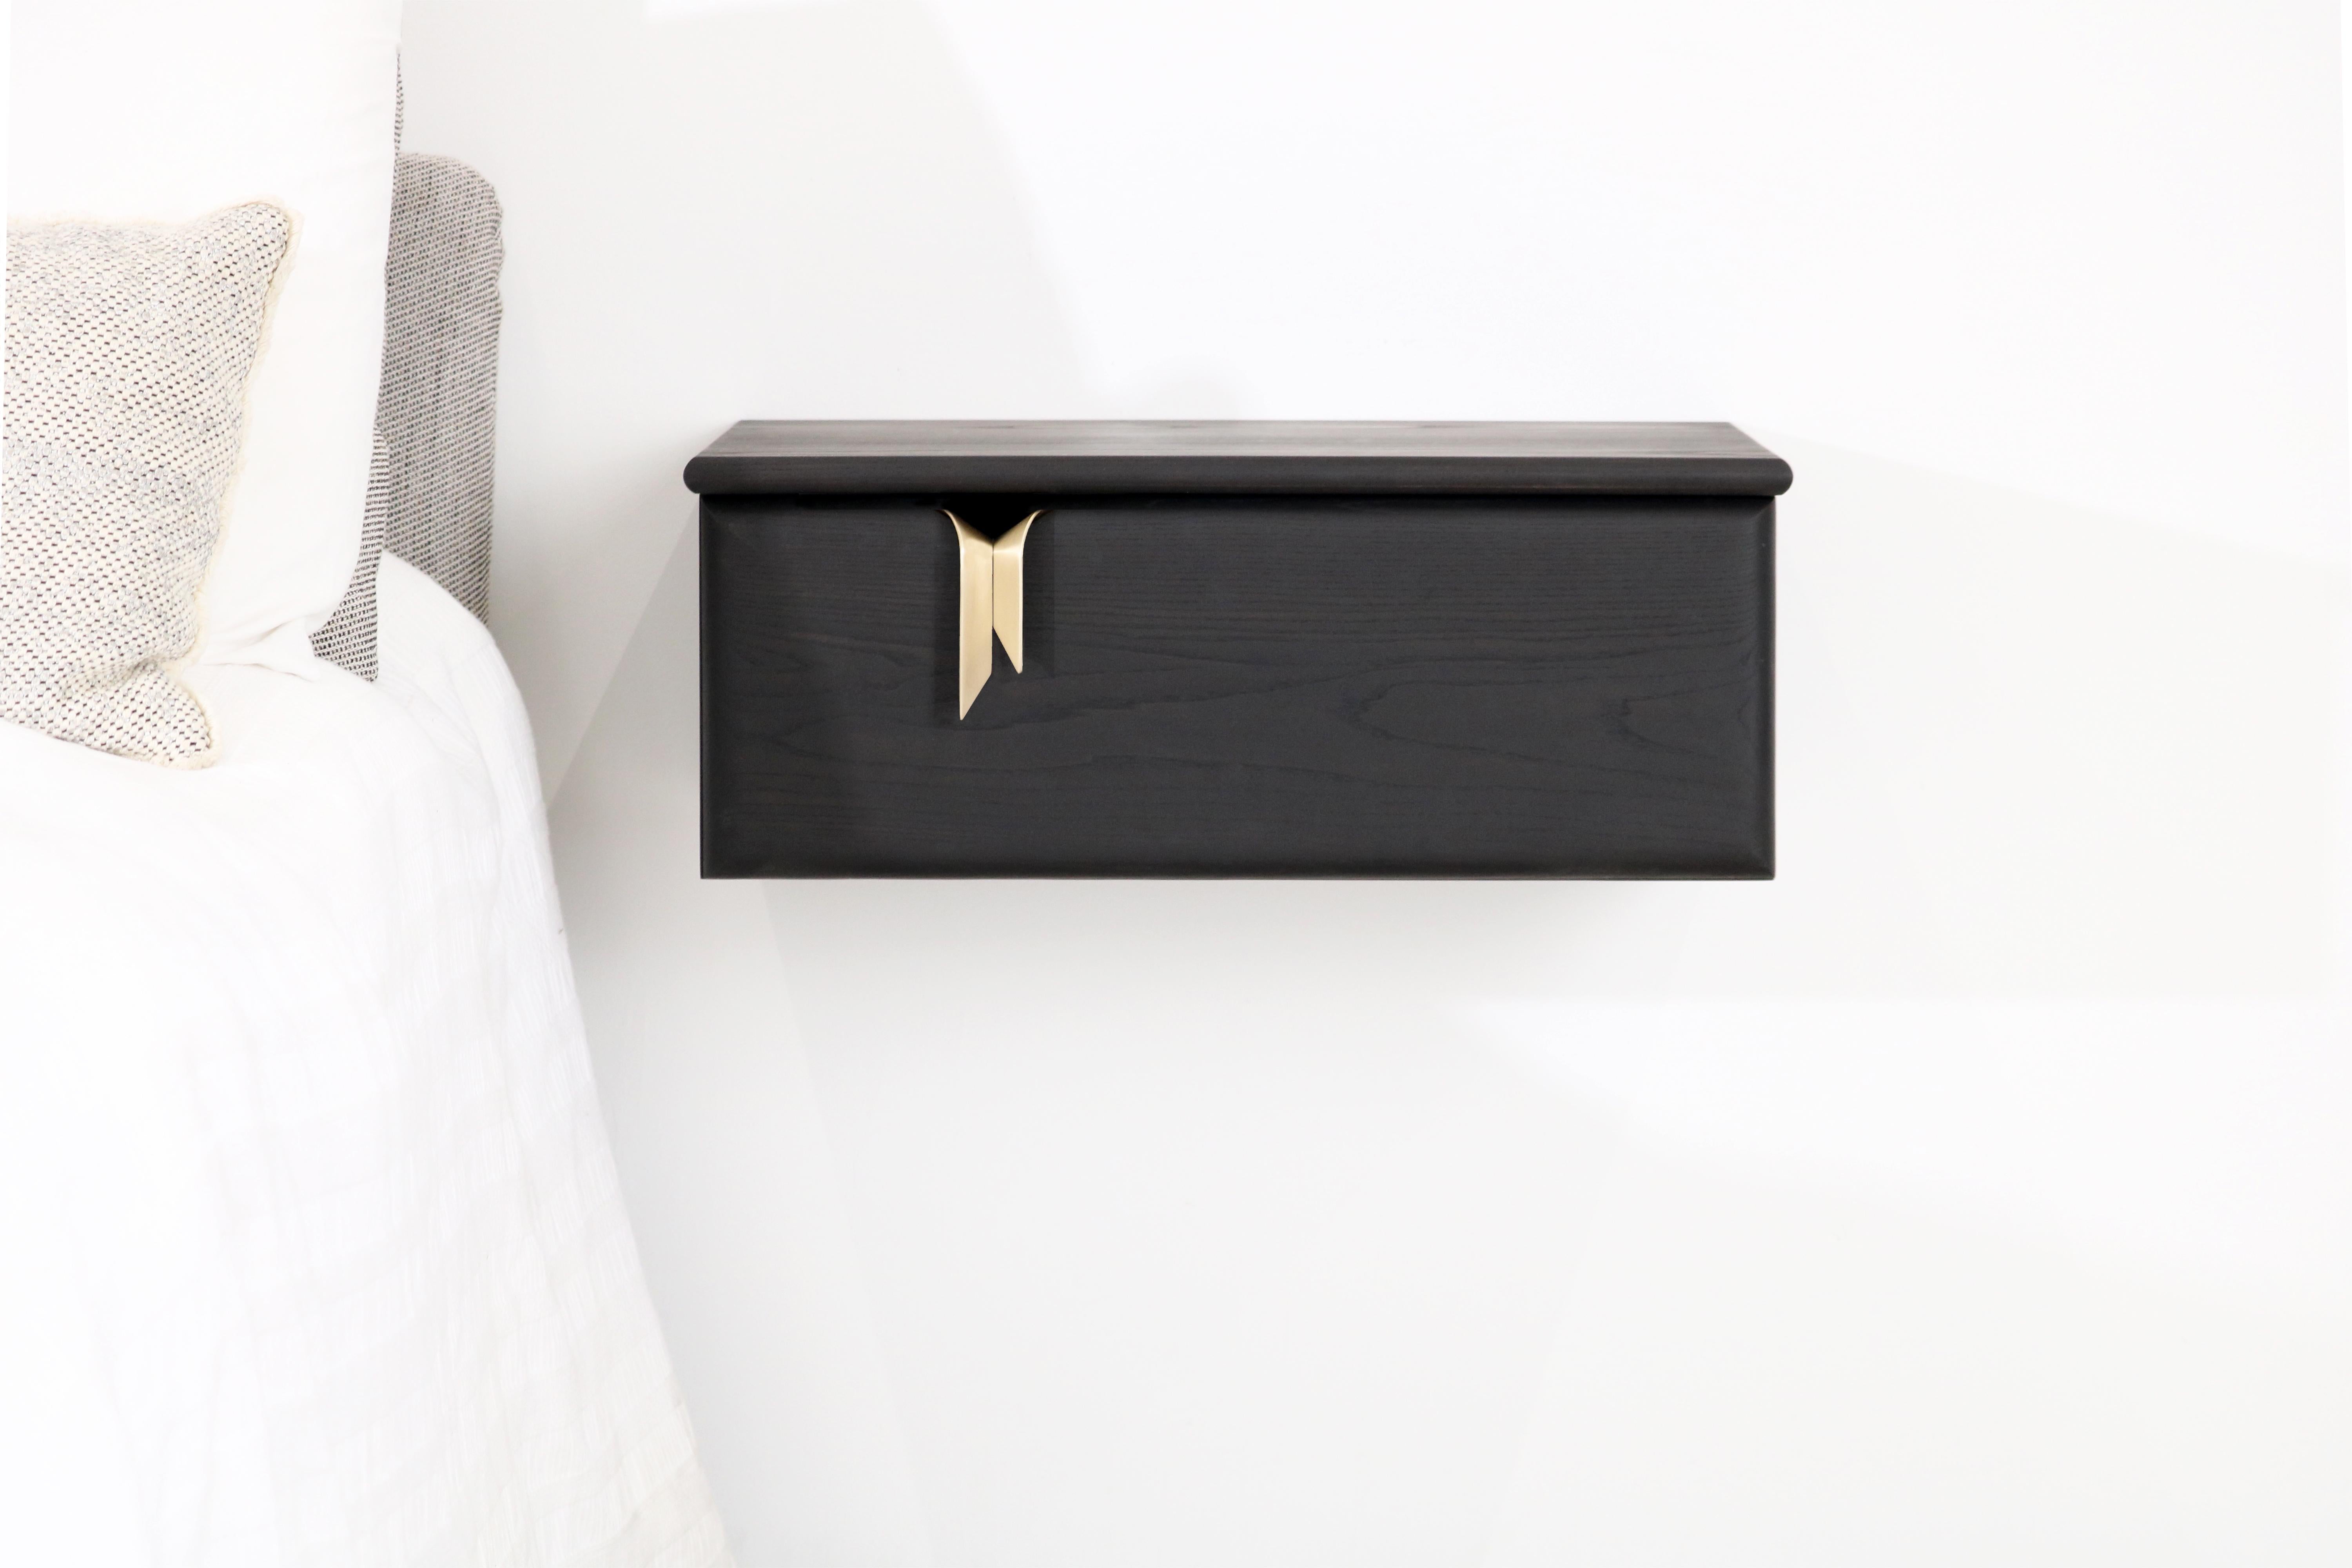 An interest in the translation of textile languages and soft surfaces through furniture forms has led to the development of a unique hardware and storage collection. Inspired by ribbons and communicated through hand cast solid bronze hardware and